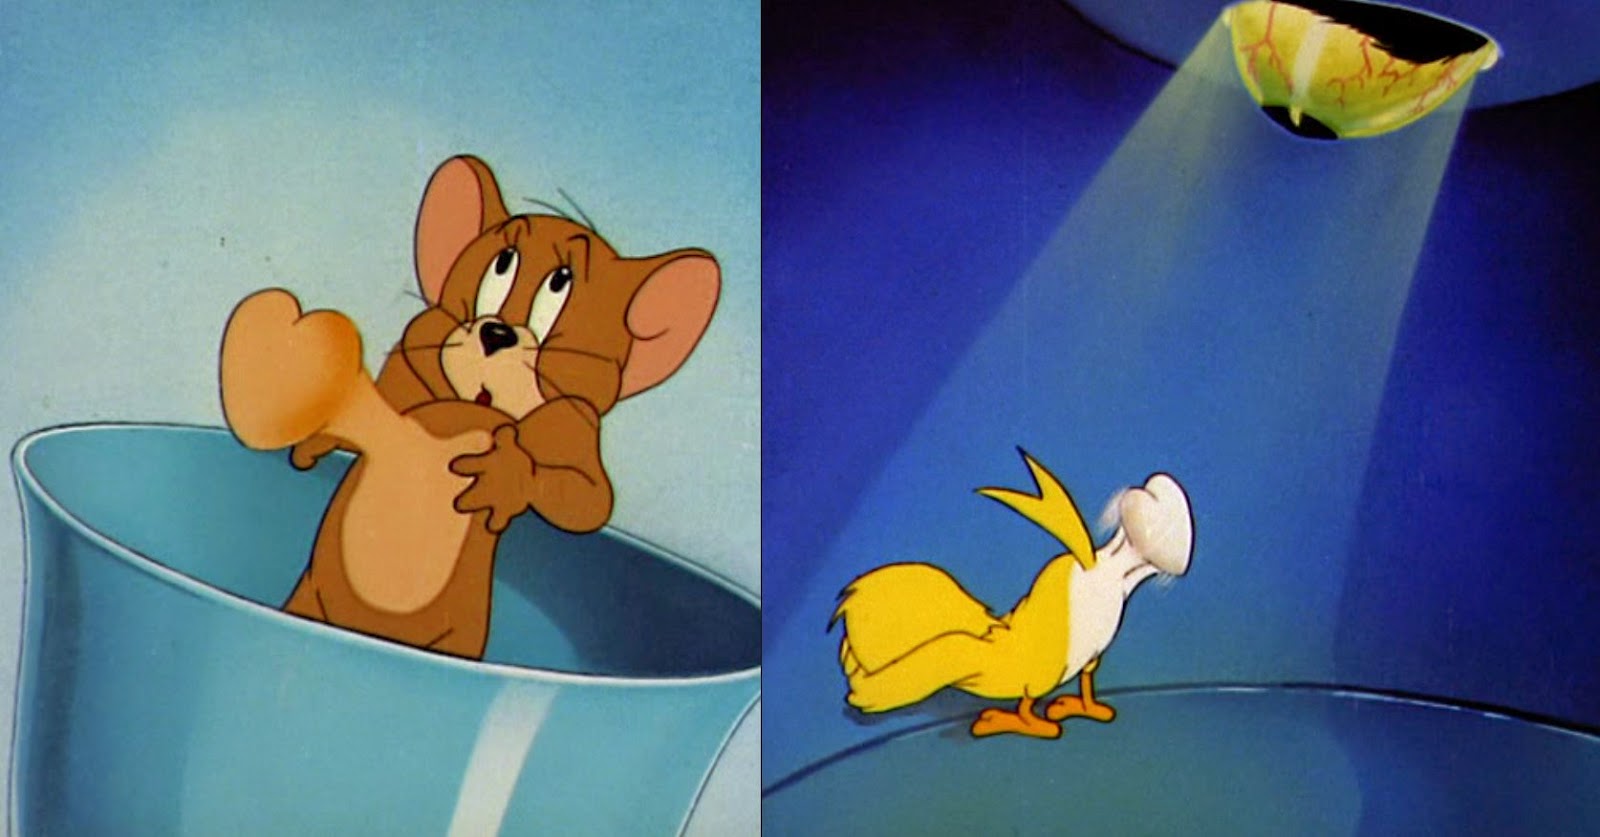 Now, here's a Tom and Jerry cartoon worthy of deep analysis. 